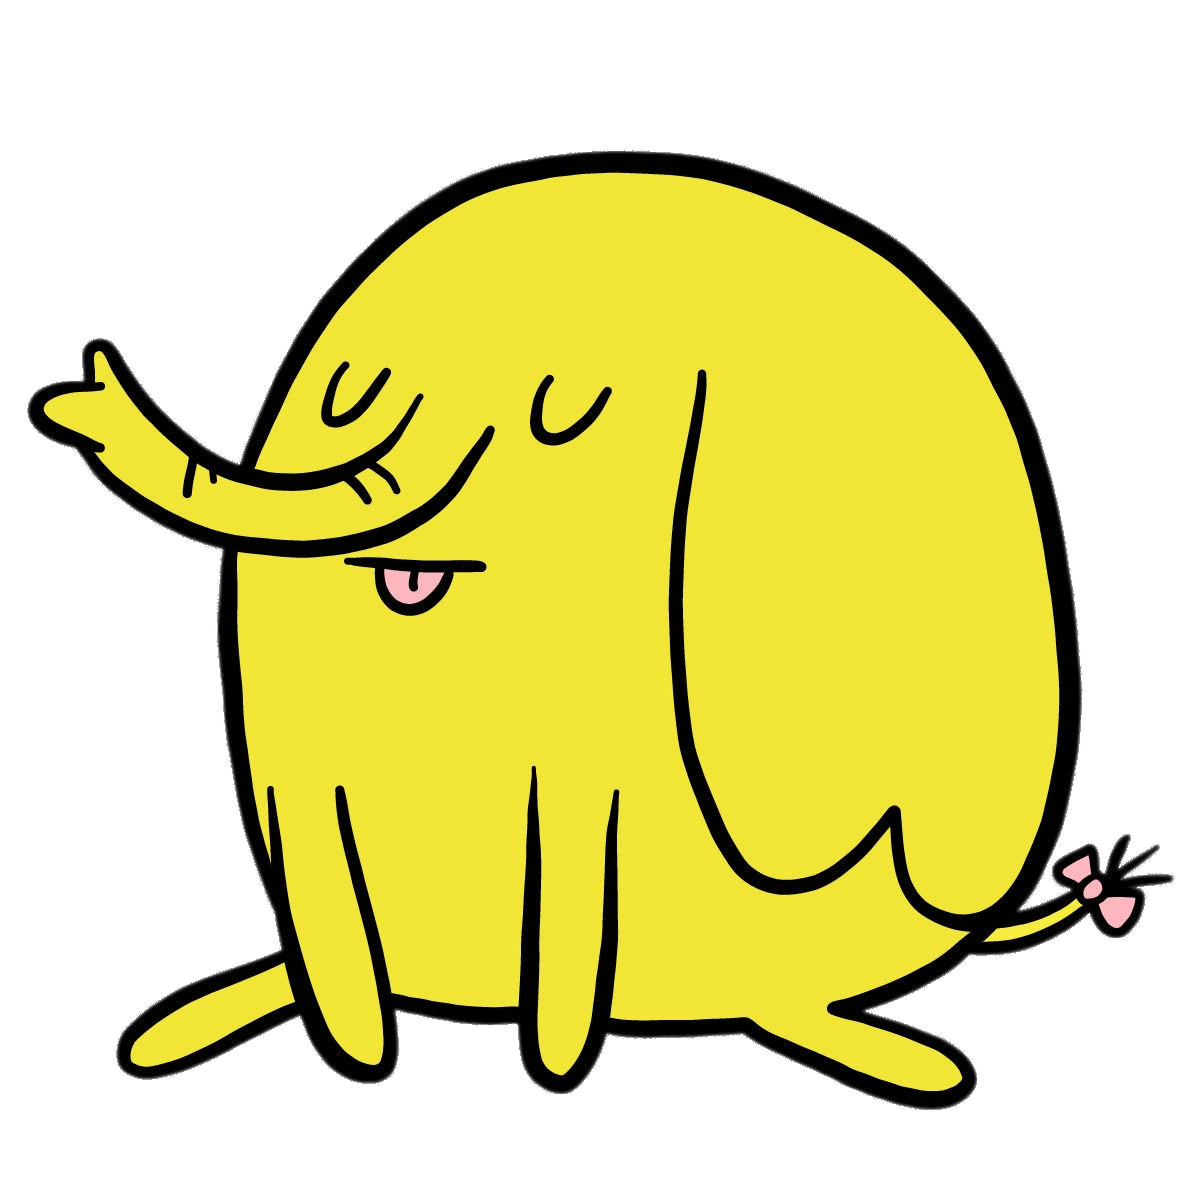 Adventure Time Tree Trunks the Elephant Sitting icons